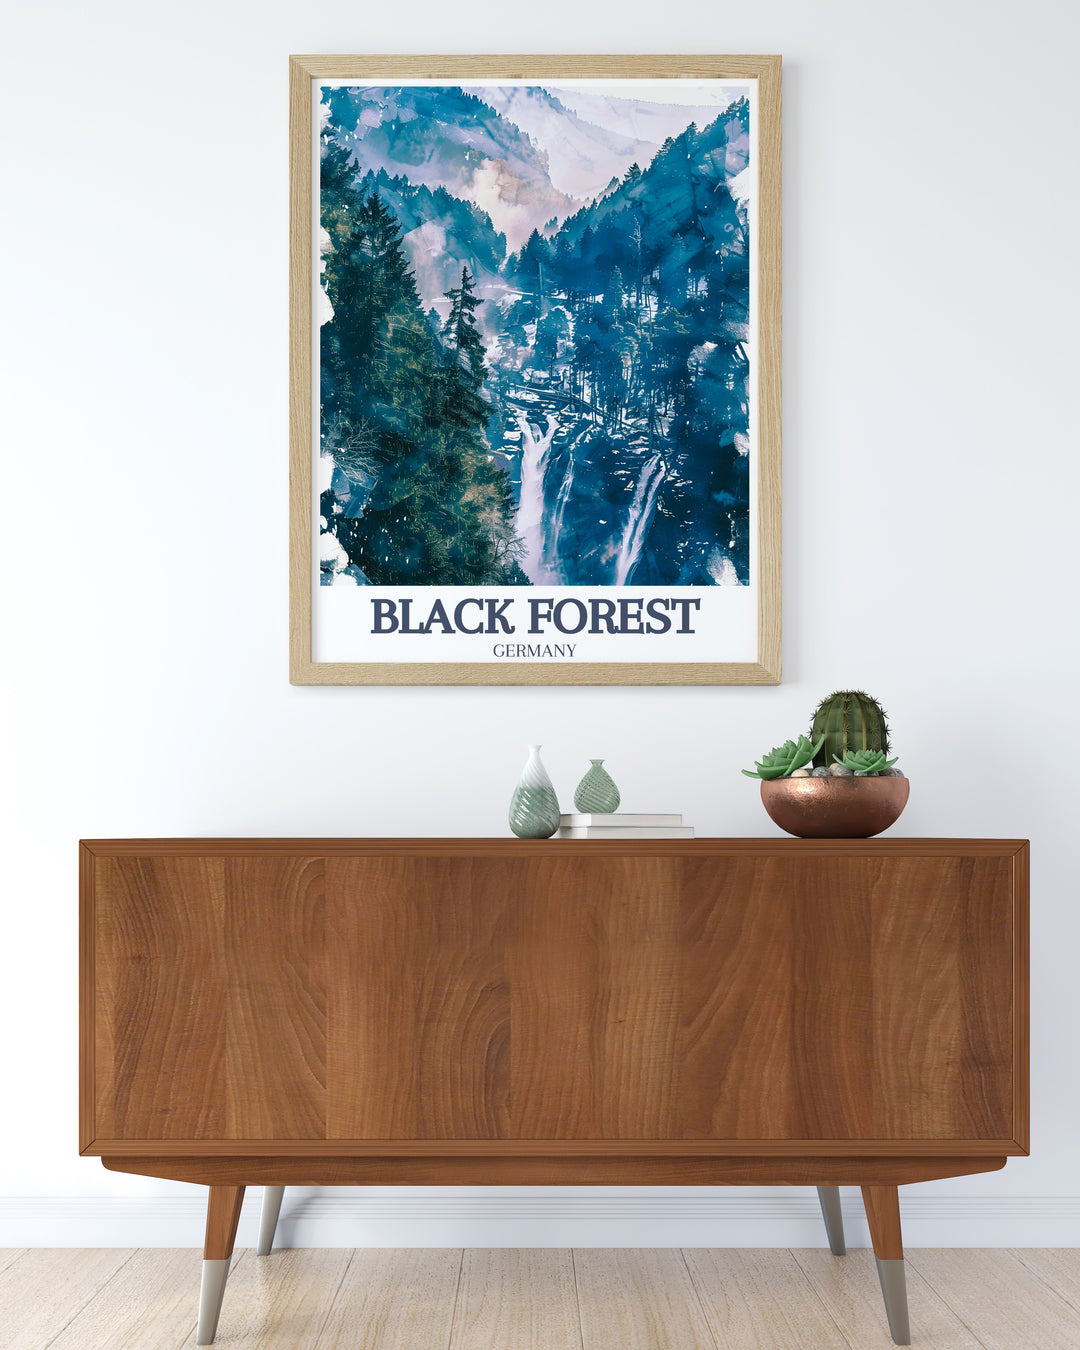 A mesmerizing Schwarzwald Print of Triberg Waterfalls, Baden Württemberg perfect for adding a touch of nature's beauty to any room this Black Forest Artwork makes an ideal gift for travelers and nature enthusiasts looking to bring a piece of Germanys enchanting forest into their home